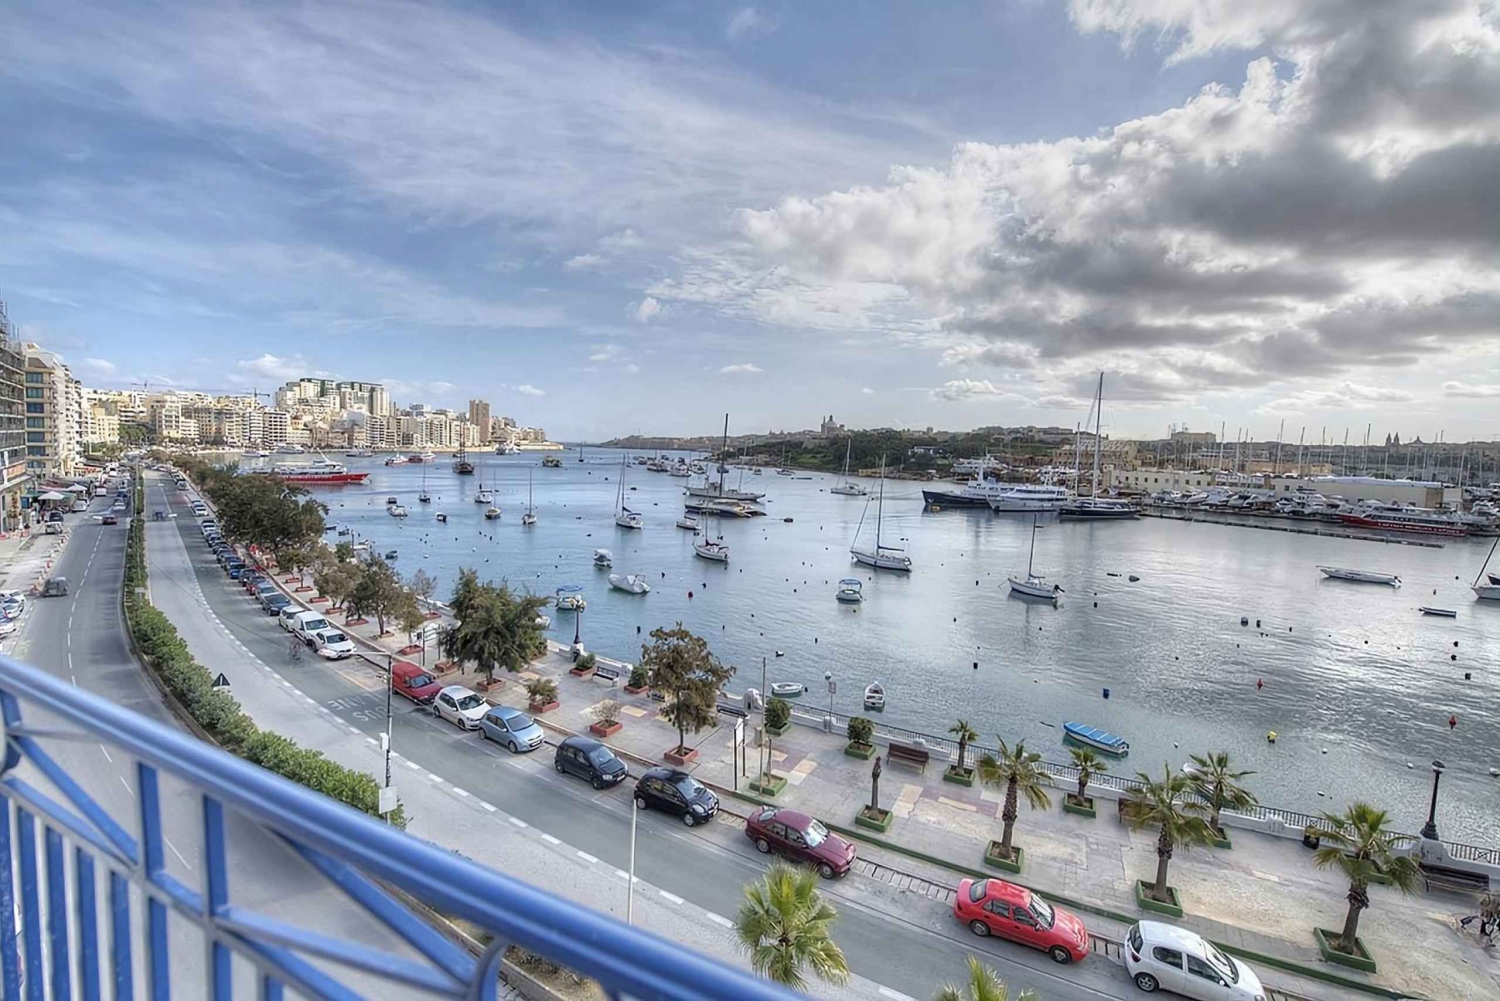 Sliema: Harbour Cruise and Shopping in Sliema Afternoon Tour